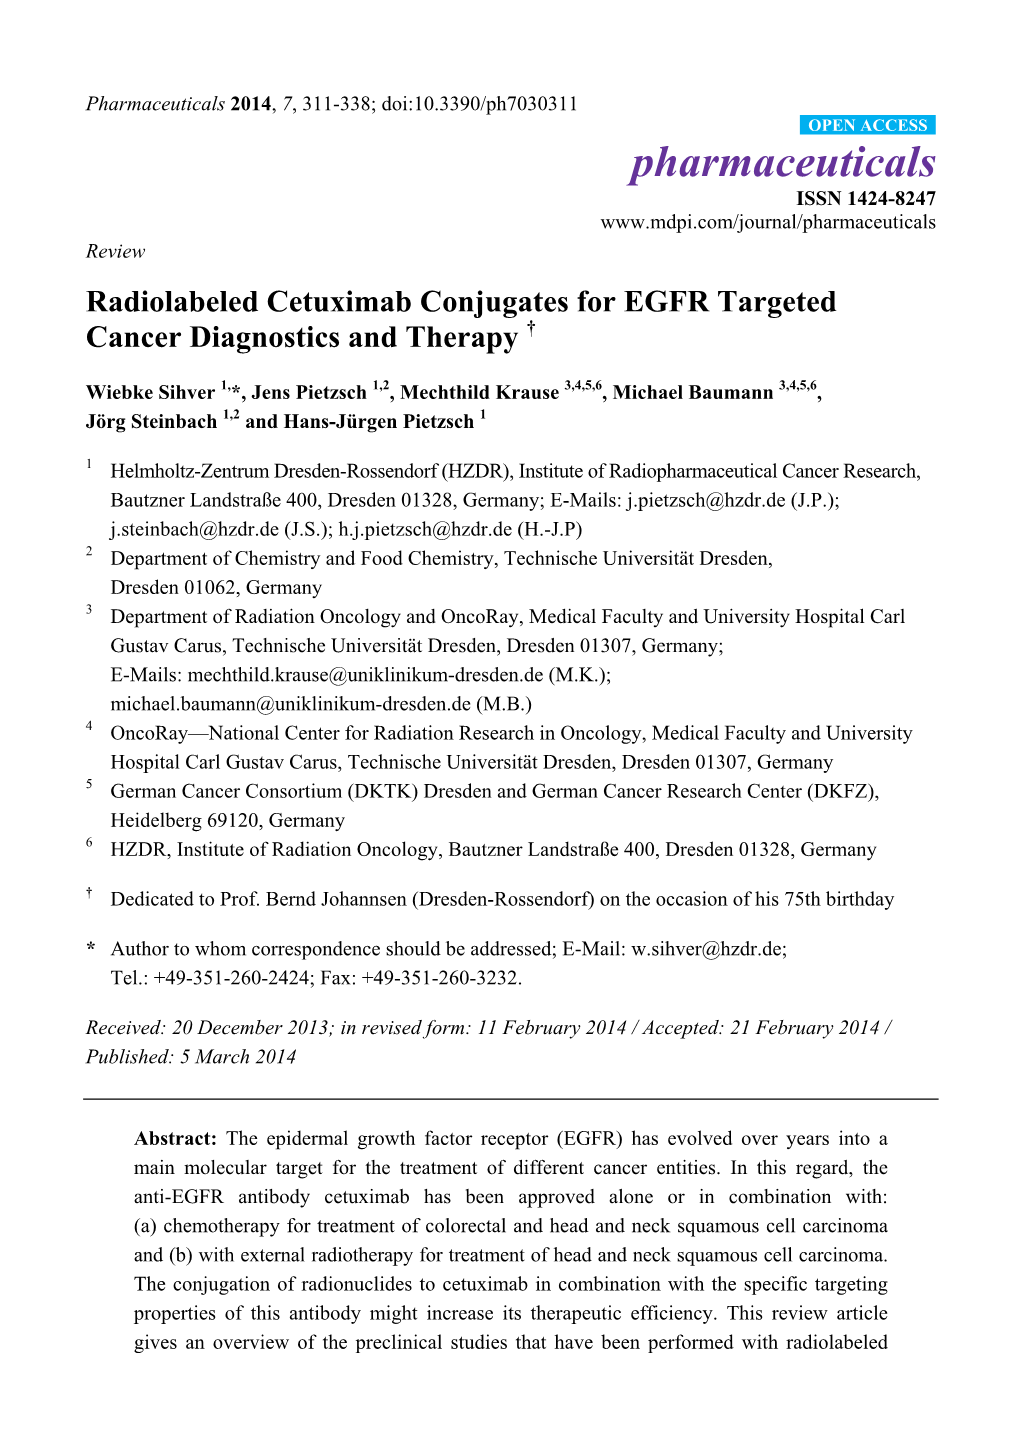 Radiolabeled Cetuximab Conjugates for EGFR Targeted Cancer Diagnostics and Therapy †